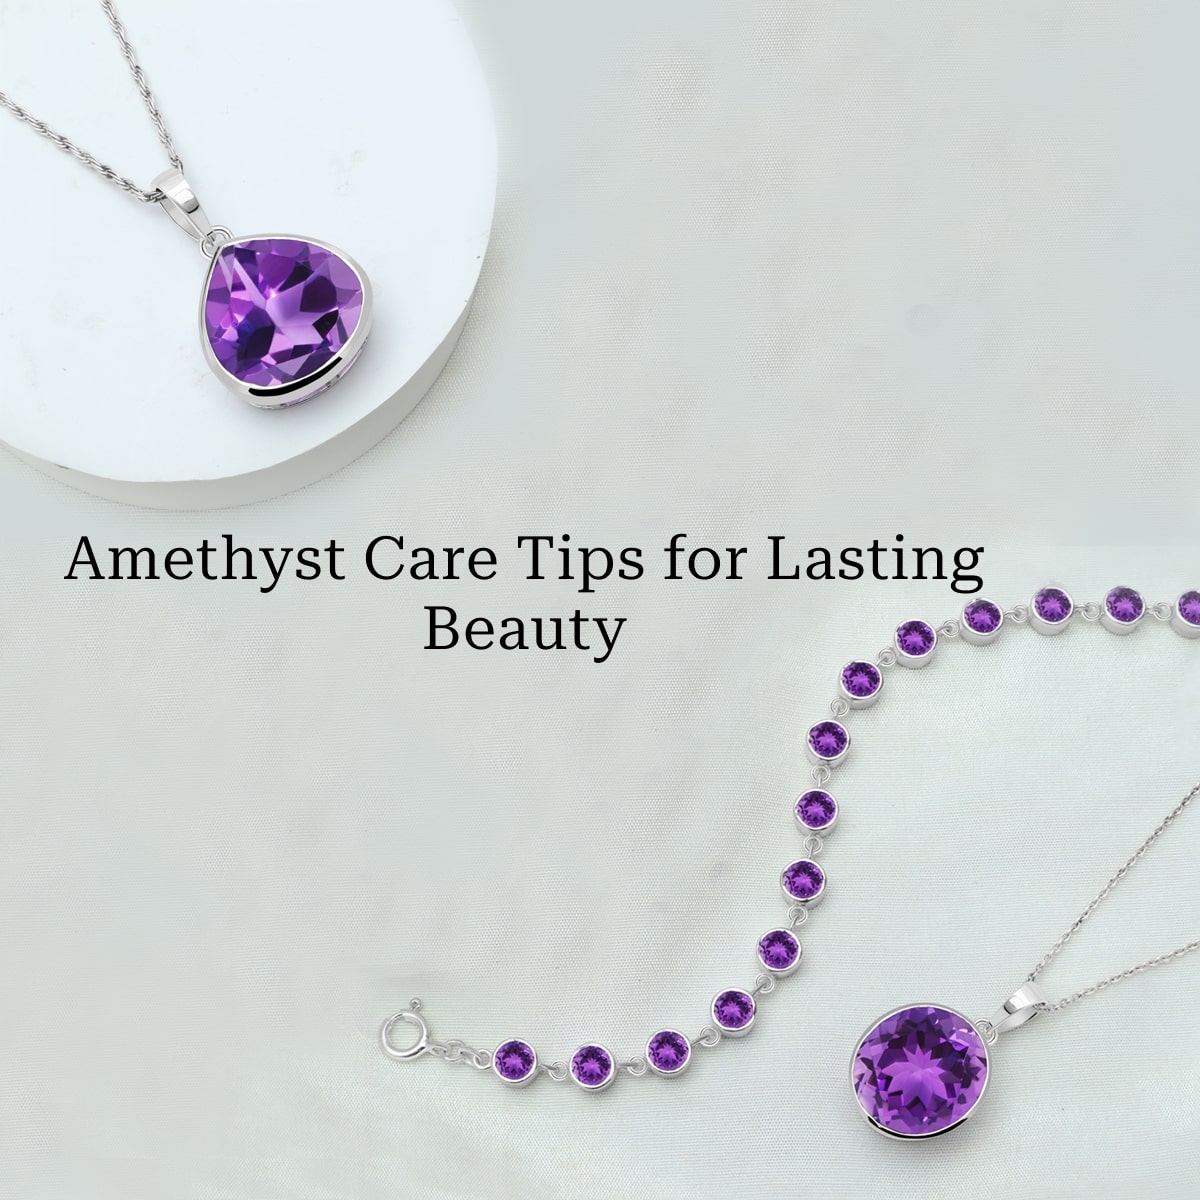 Care of Amethyst Jewelry